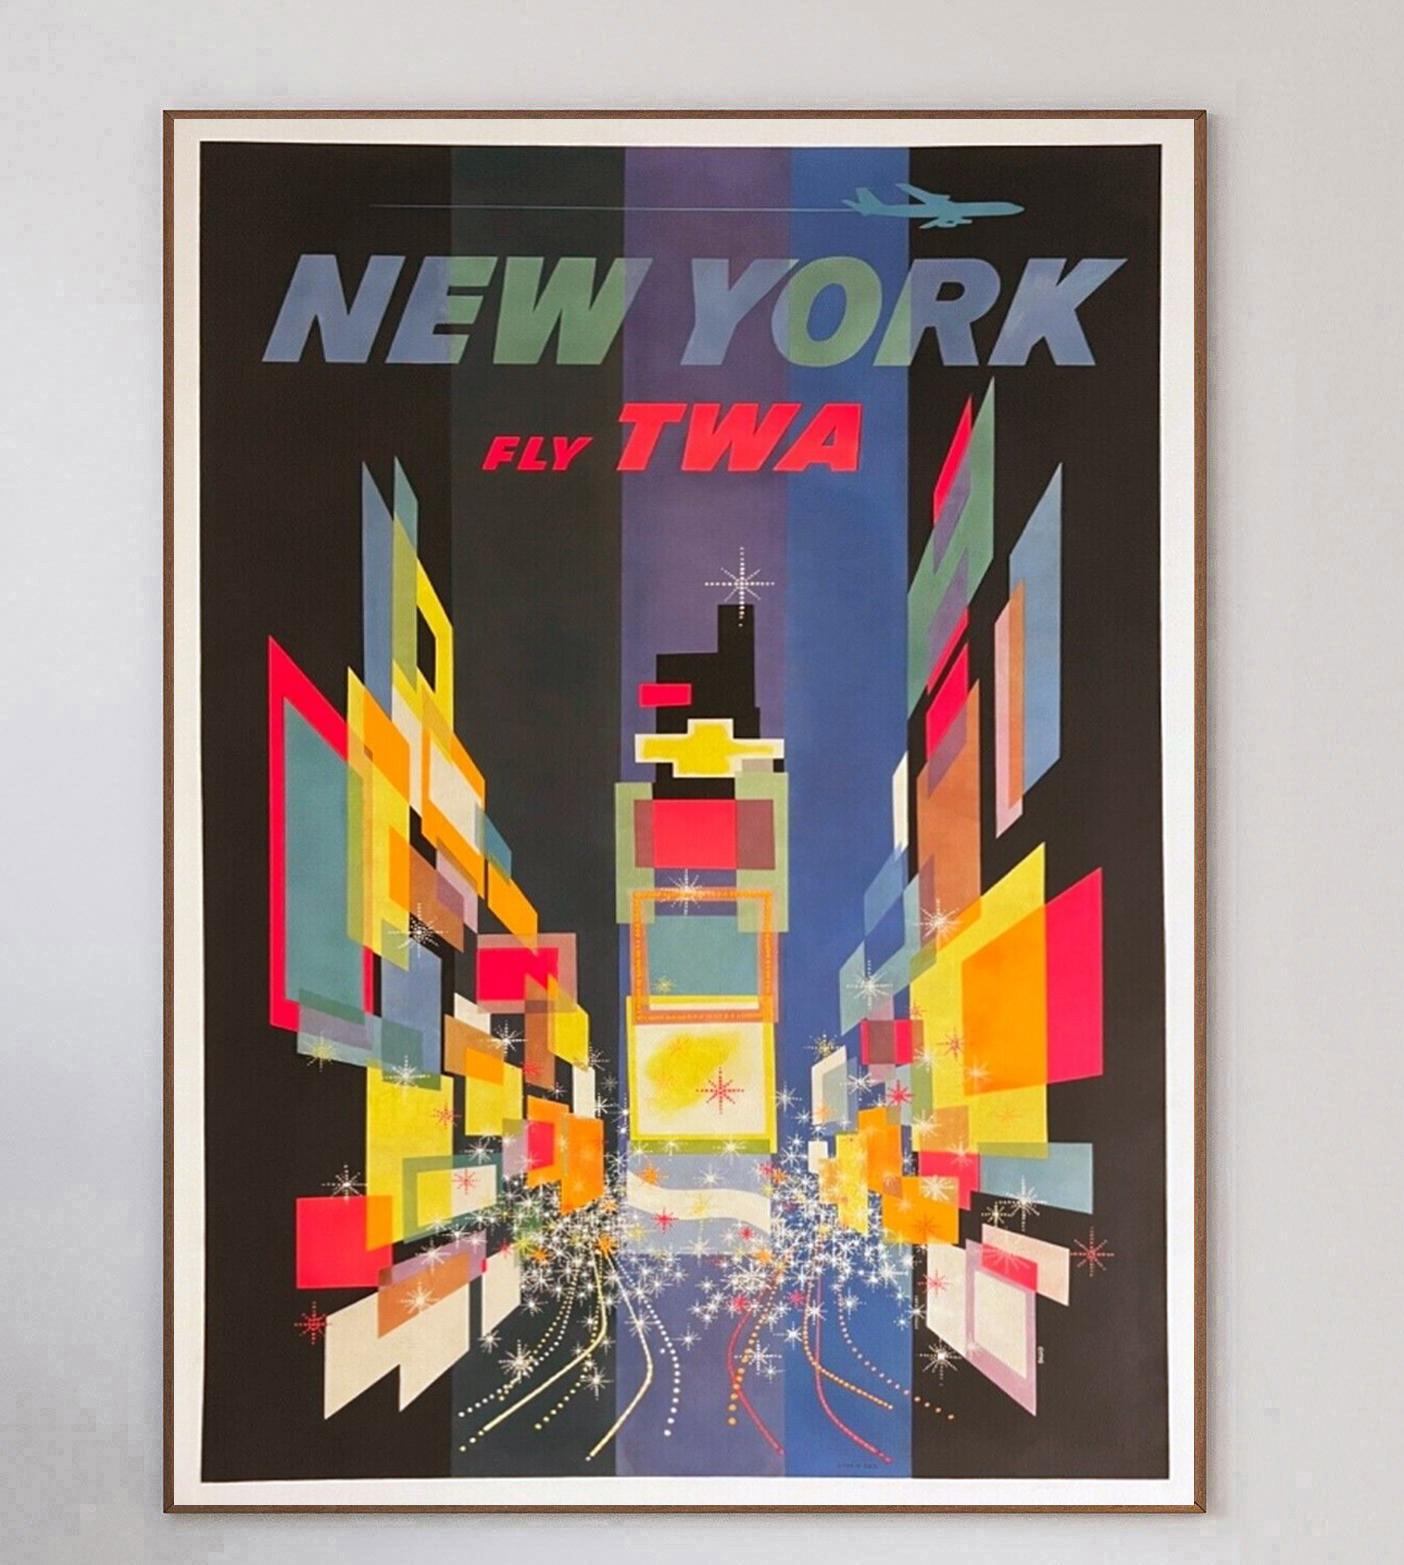 This poster was created in 1960 for Howard Hughes’ Trans World Airlines promoting their routes to New York. Illustrated by influential American artist David Klein, this design features a wonderfully stylized image of Times Square and has become one